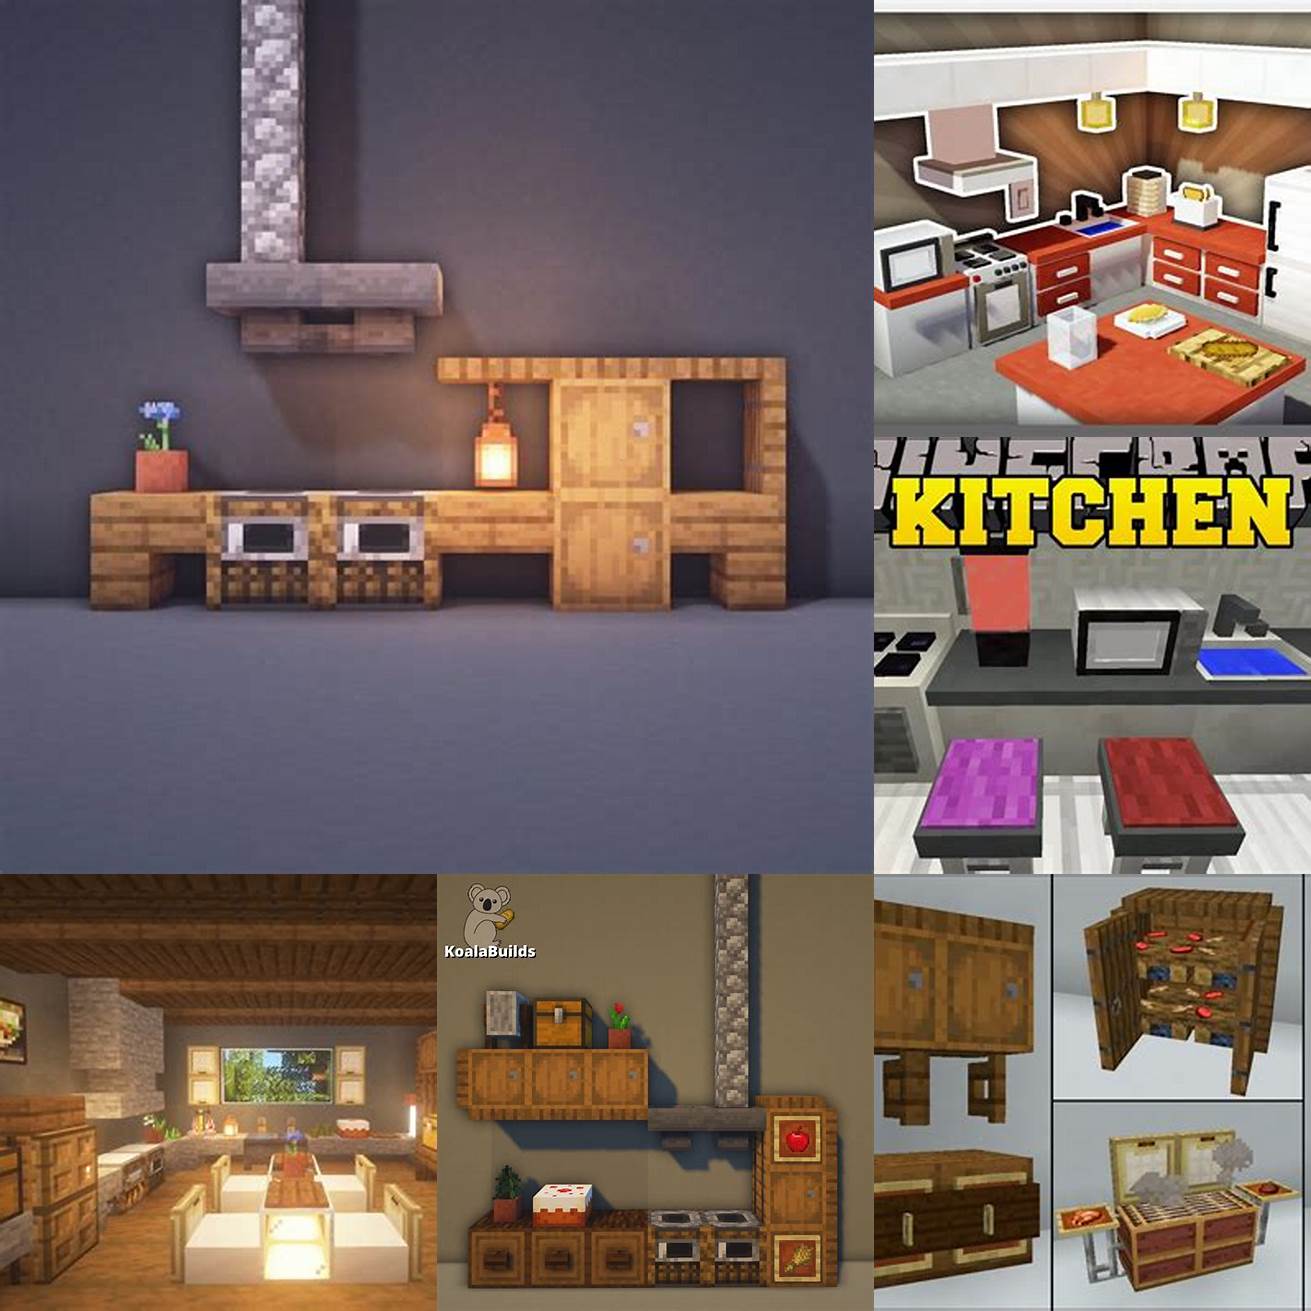 Cook up a storm in your new Minecraft kitchen complete with functional appliances from the Minecraft Furniture Mod